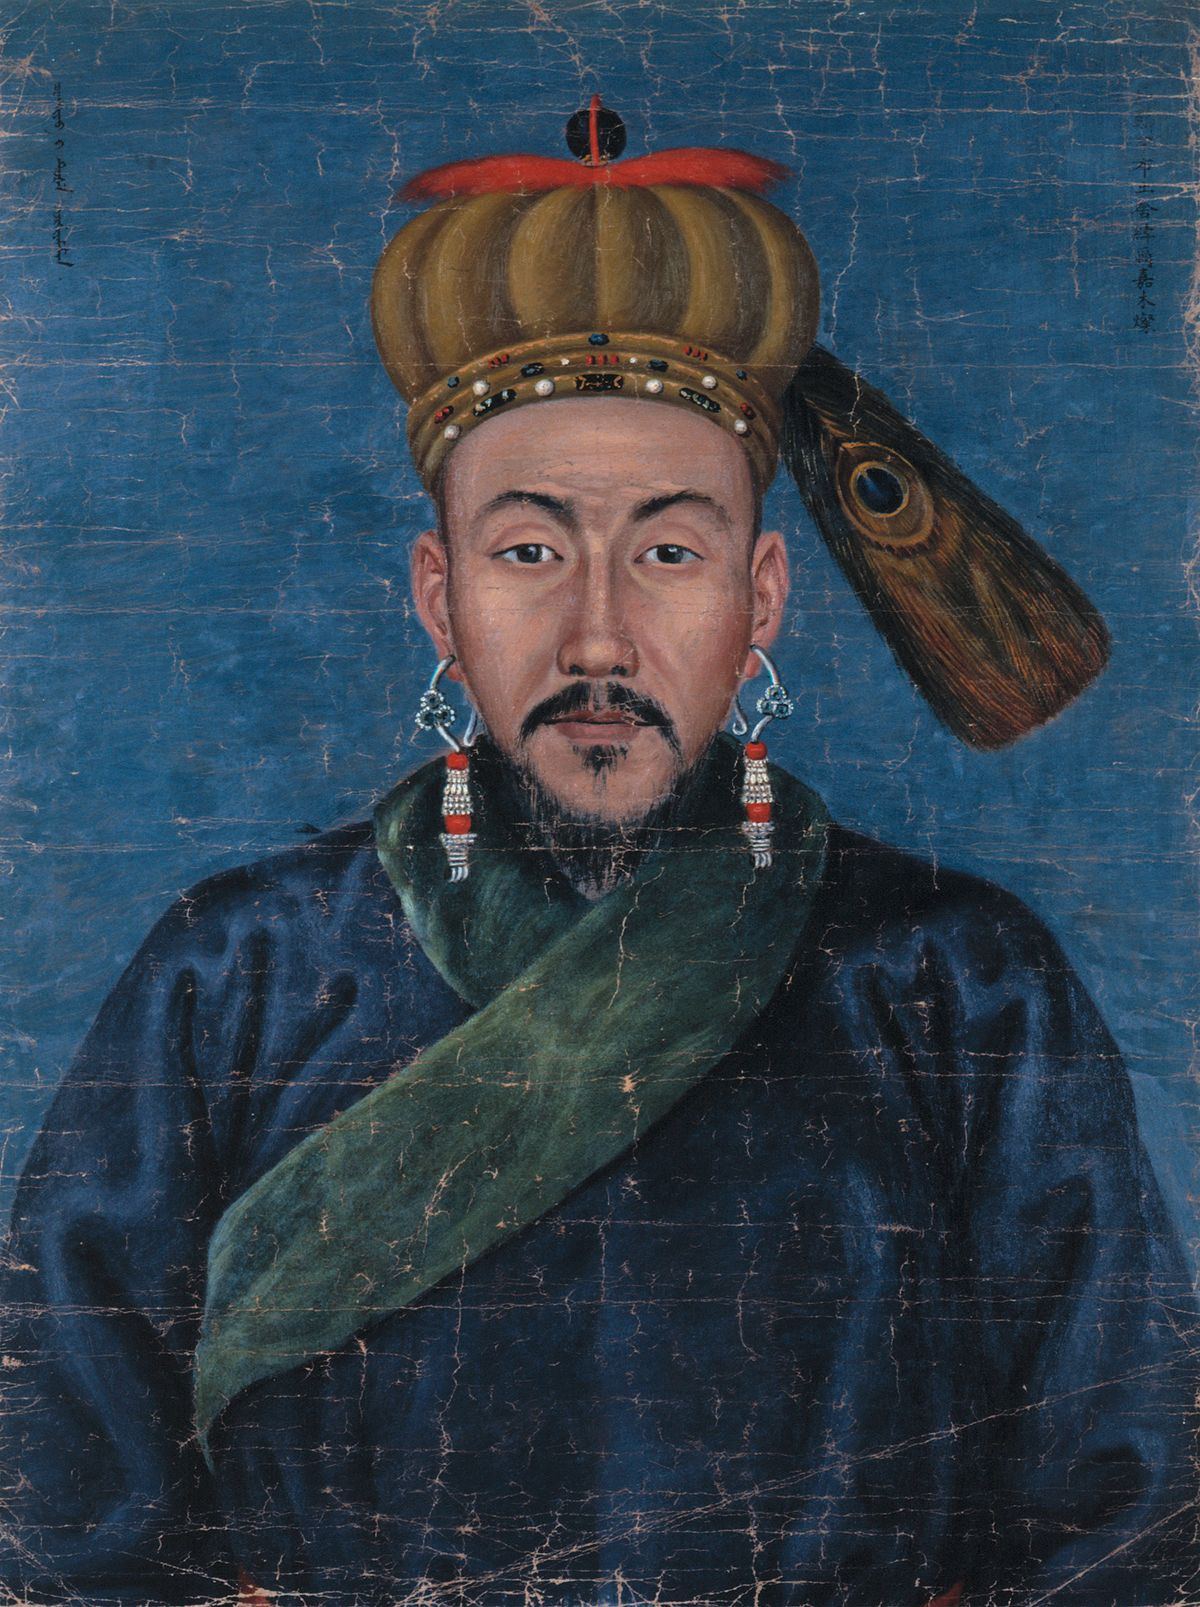 Portrait of Mongolian prince Corgi yamz’an, originating from the Winter Palace in Beijing. Shortly after the Boxer Rebellion, the portrait went up for sale in a Berlin art dealership. Today, it is in the collection of the Ethnological Museum in Berlin and considered as potential loot from the Boxer Rebellion. Image courtesy of the Ethnological Museum in Berlin.